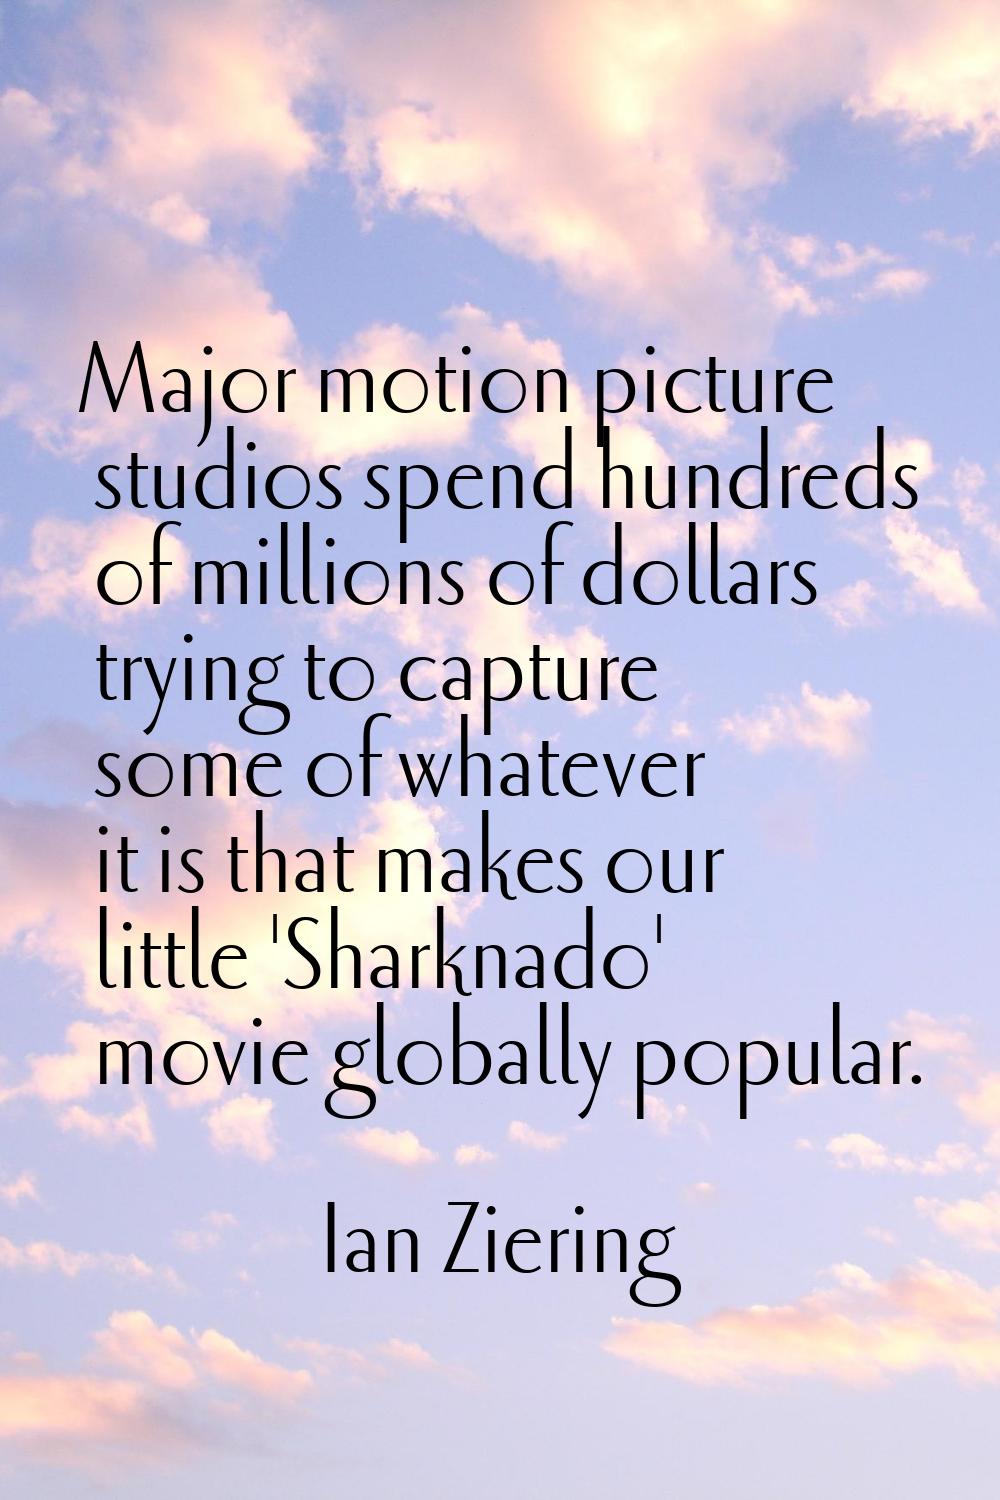 Major motion picture studios spend hundreds of millions of dollars trying to capture some of whatev